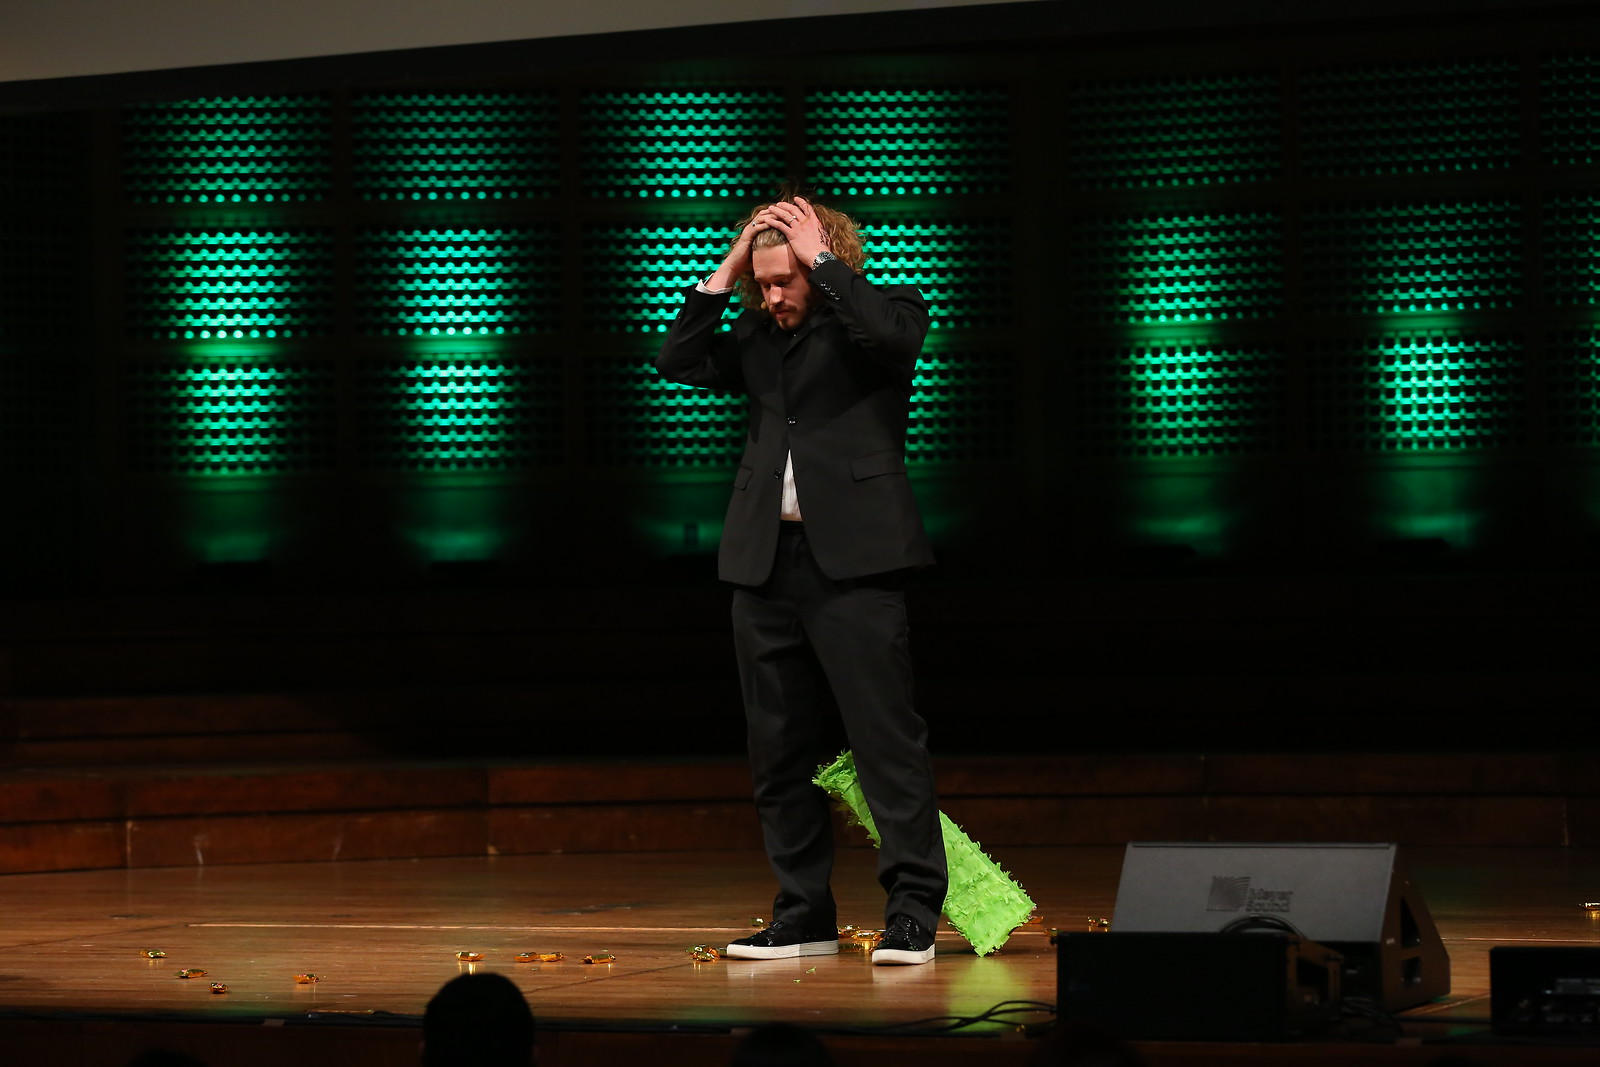 Emcee T.J. Miller, just after breaking the TechCrunch pinata over his head.